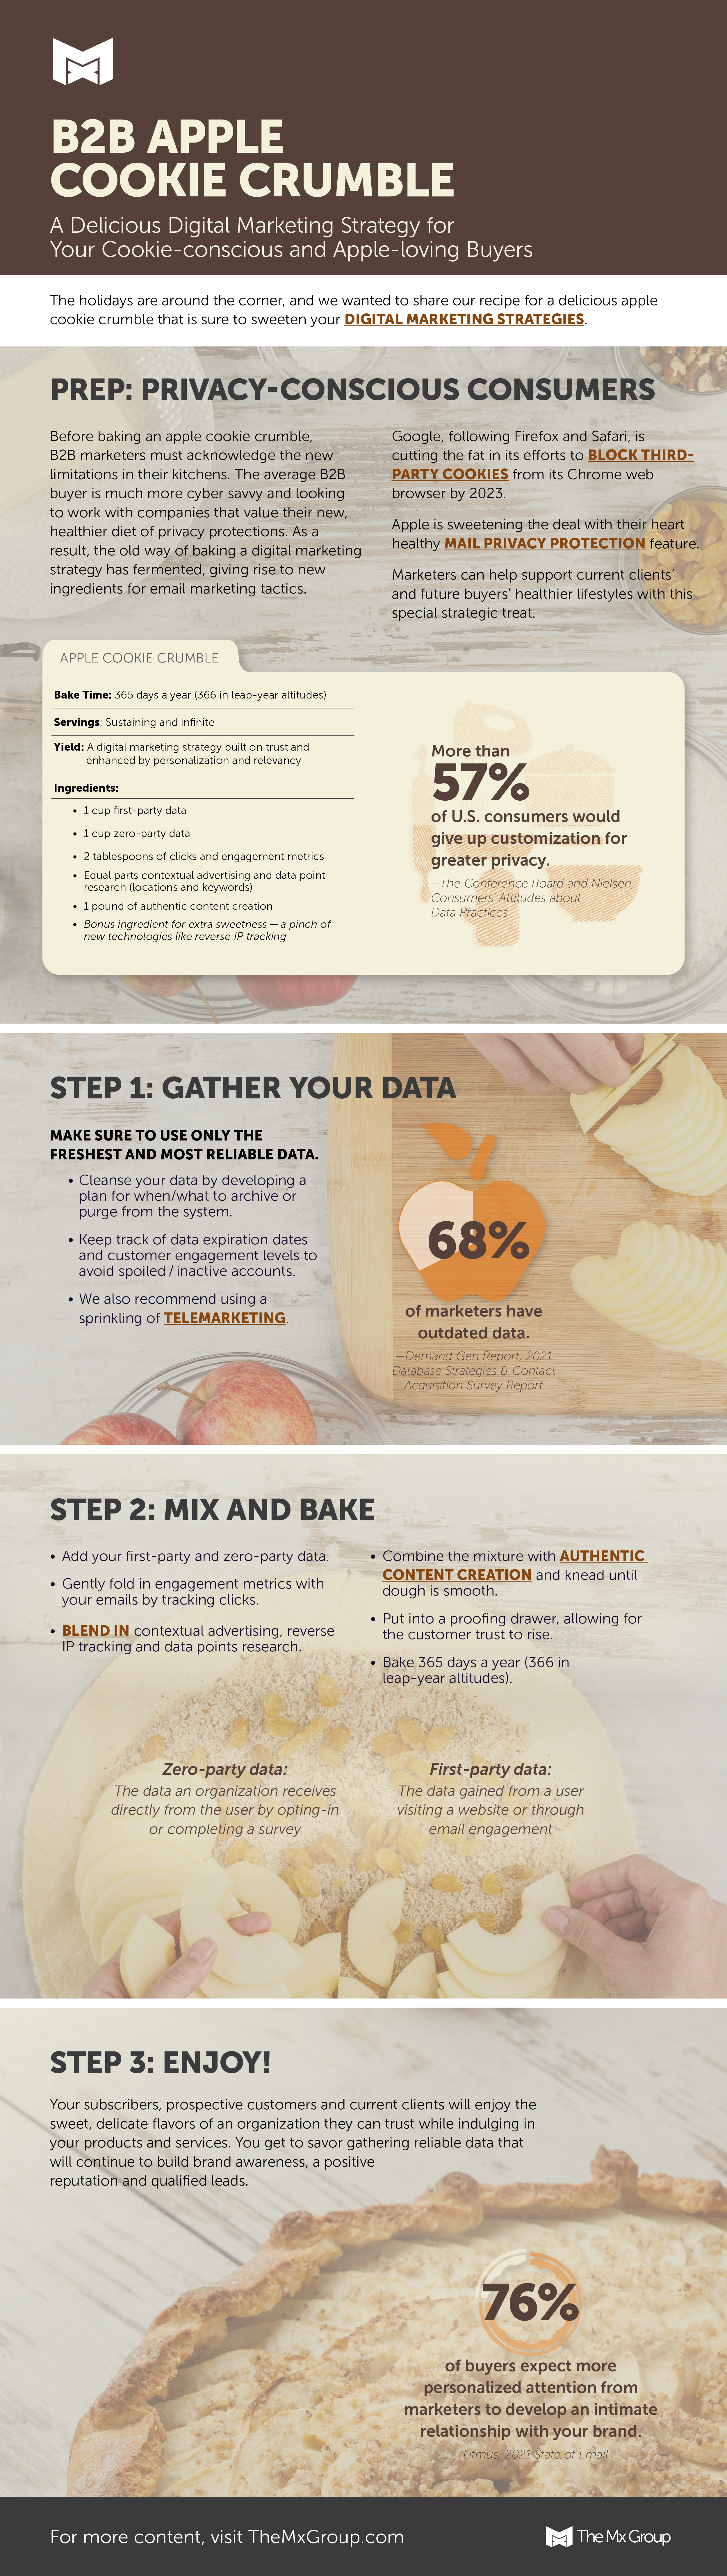 B2B Apple Cookie Crumble Infographic